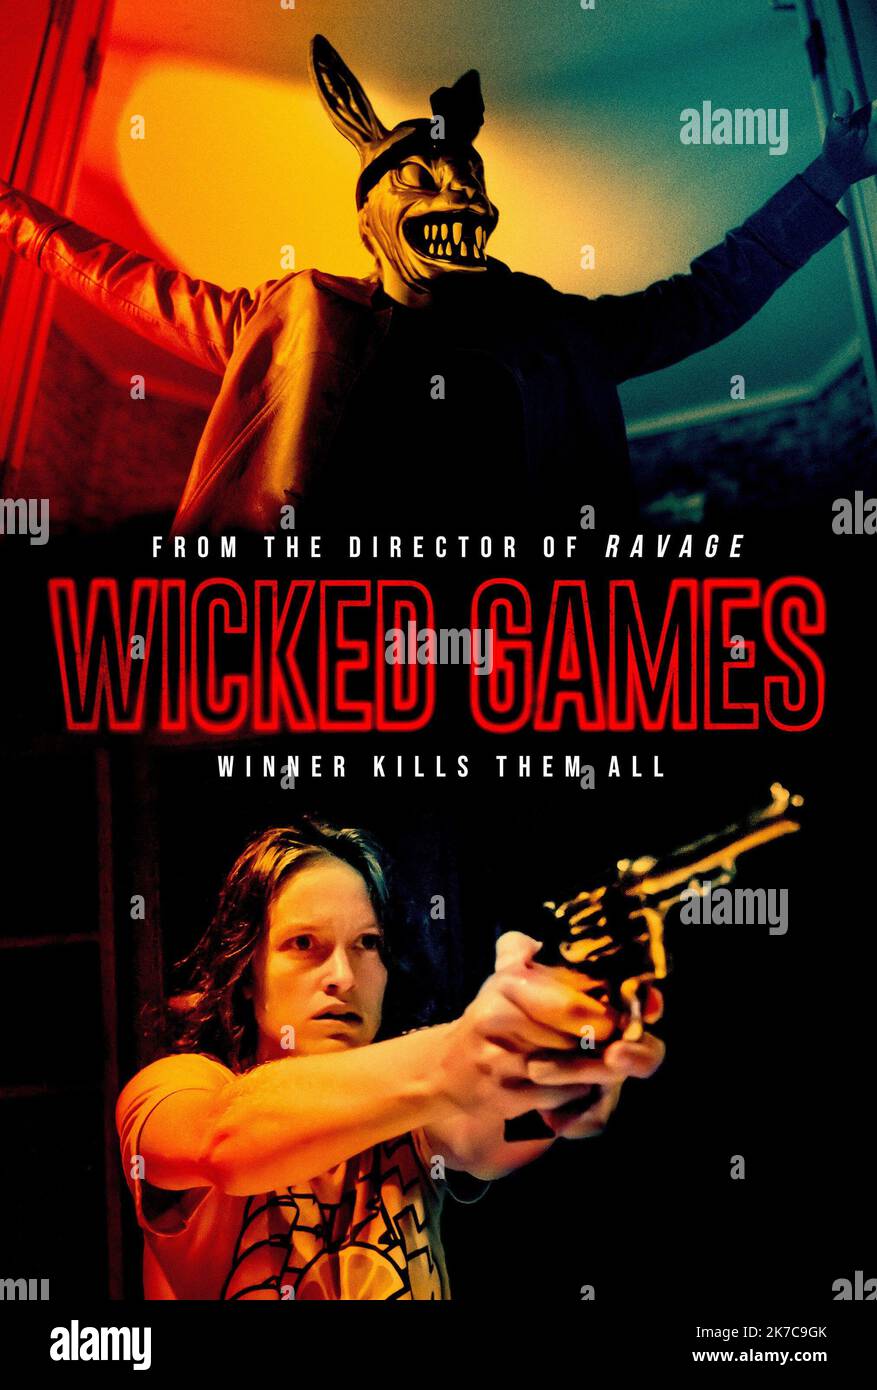 Wicked Games Poster Bottom Christine Spang 2021 © Vmi Worldwide